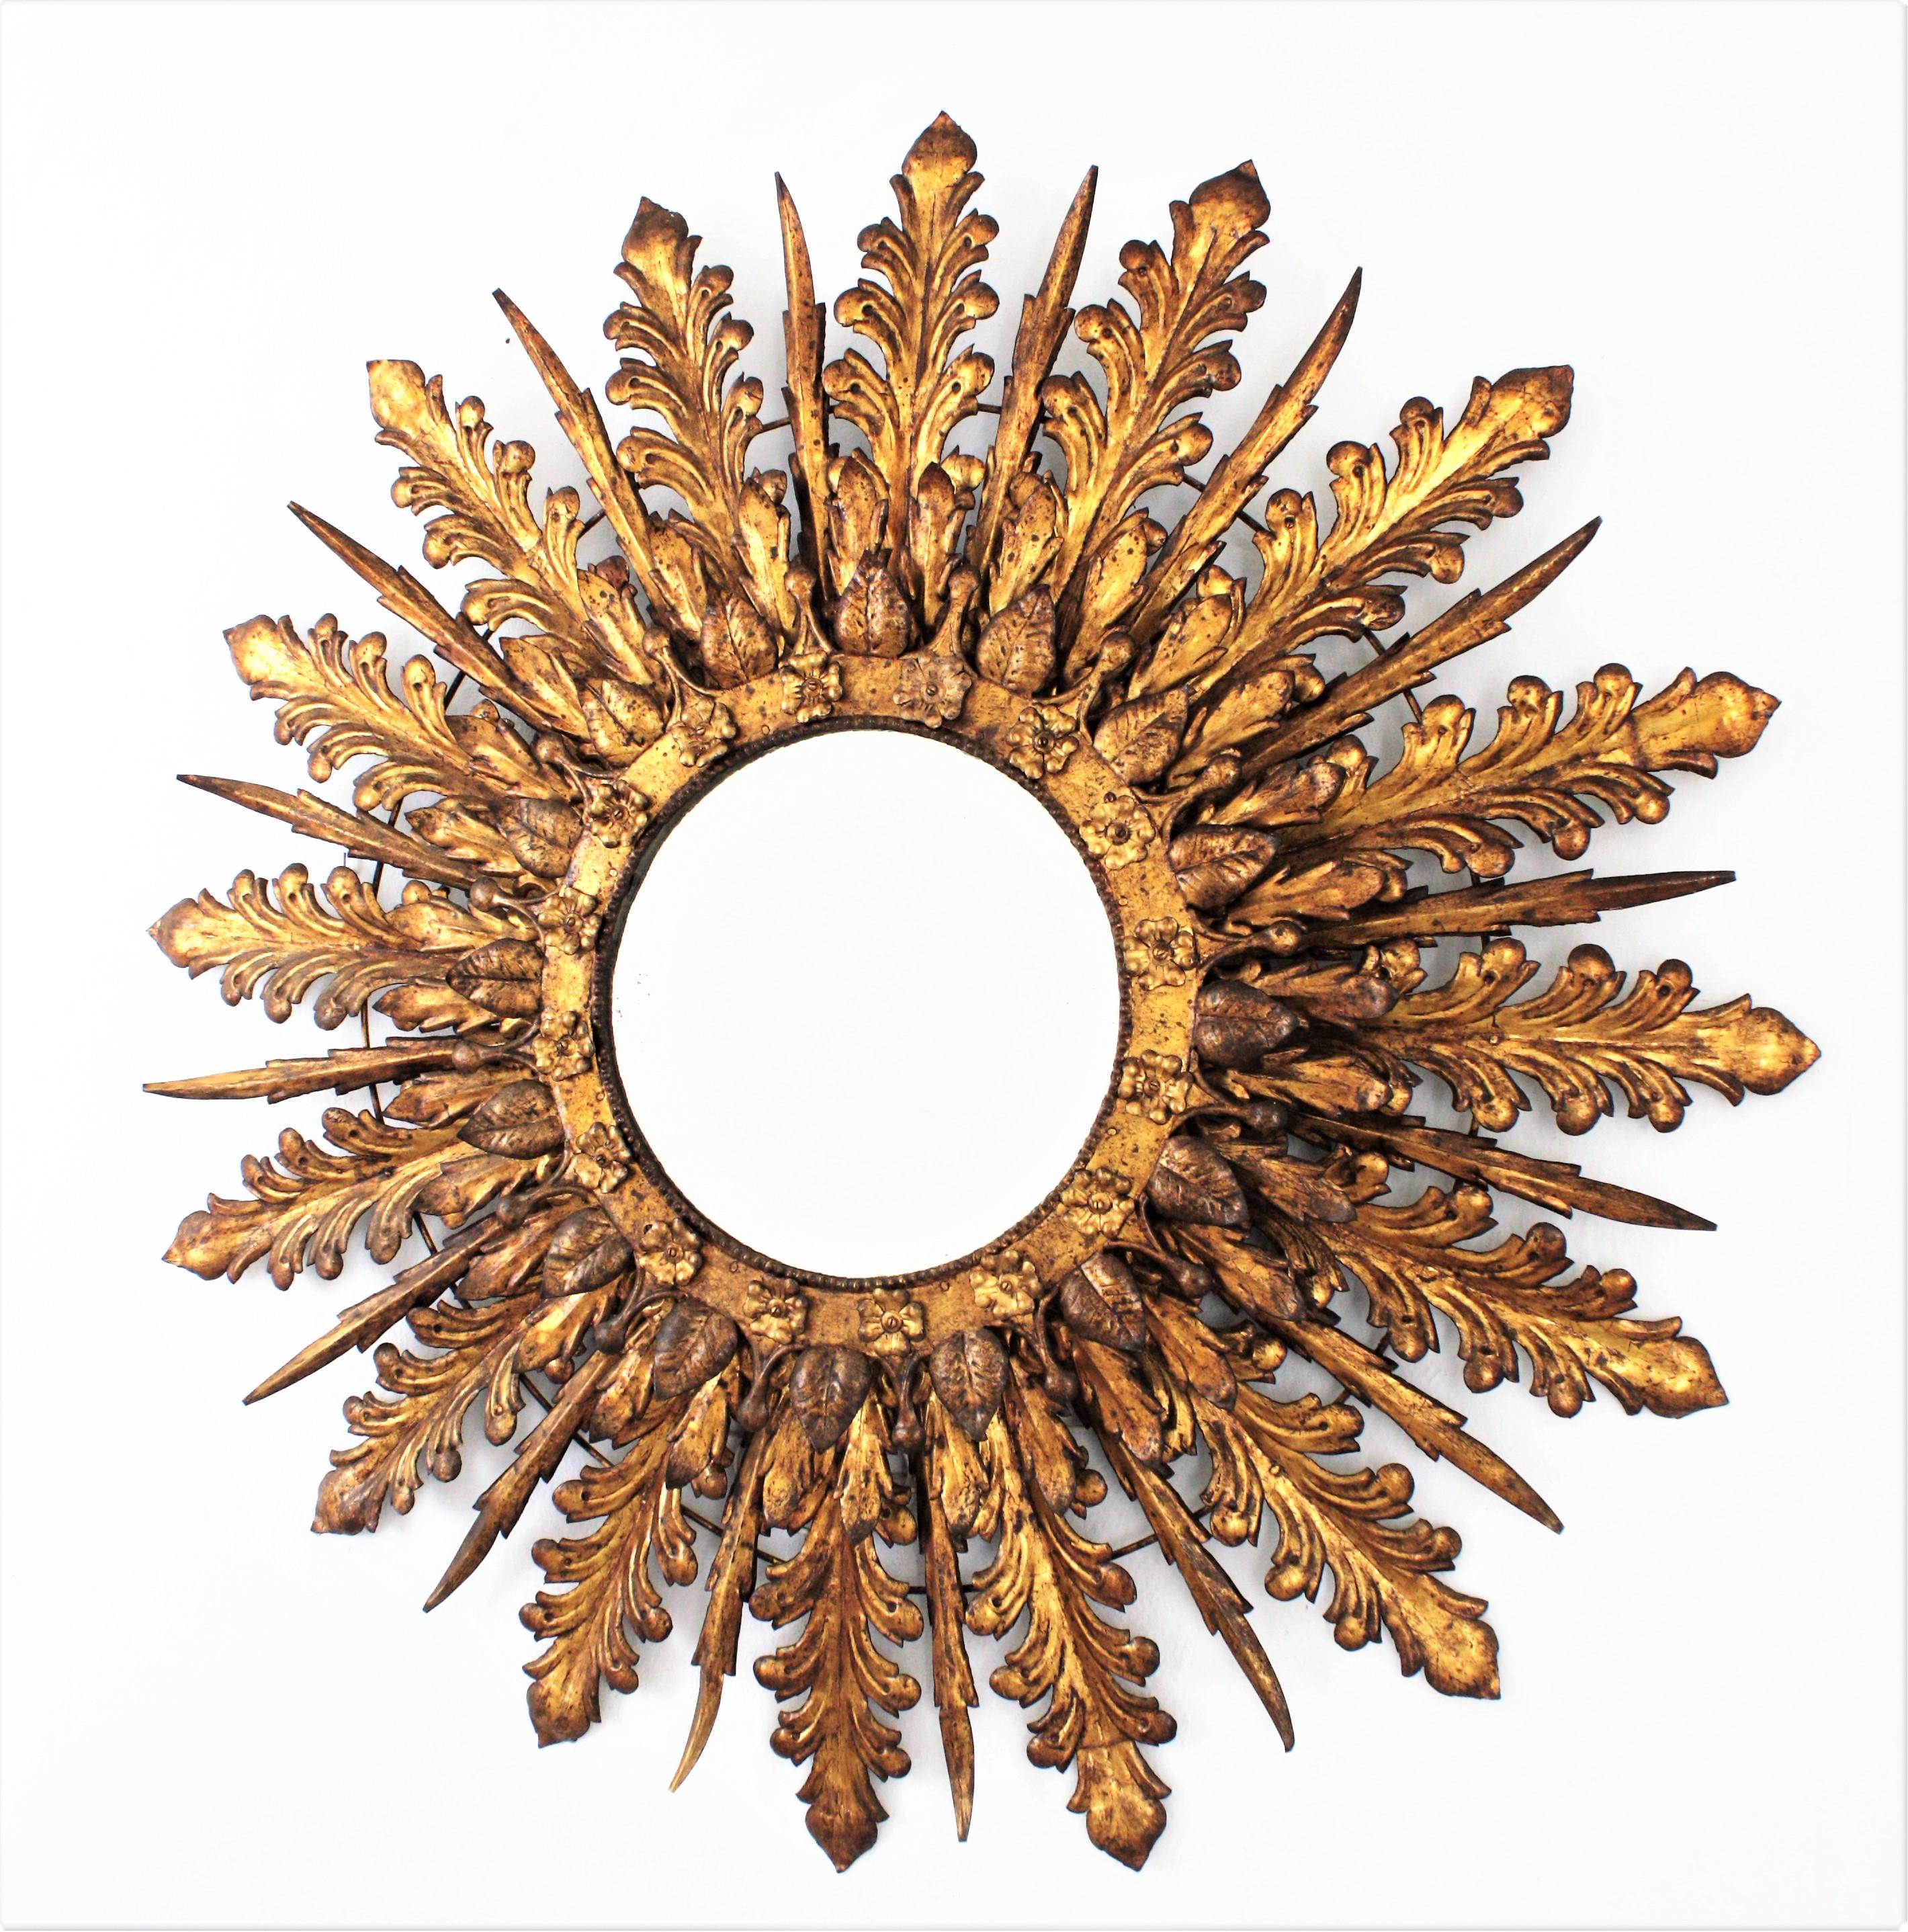 Oversized Baroque style sunburst mirror with triple layered foliage frame. France, 1930s
Massive 100 cm diameter (39.3 in) Baroque style hand-hammered iron leafed sunburst backlit mirror with floral decorations
This outstanding and heavily adorned